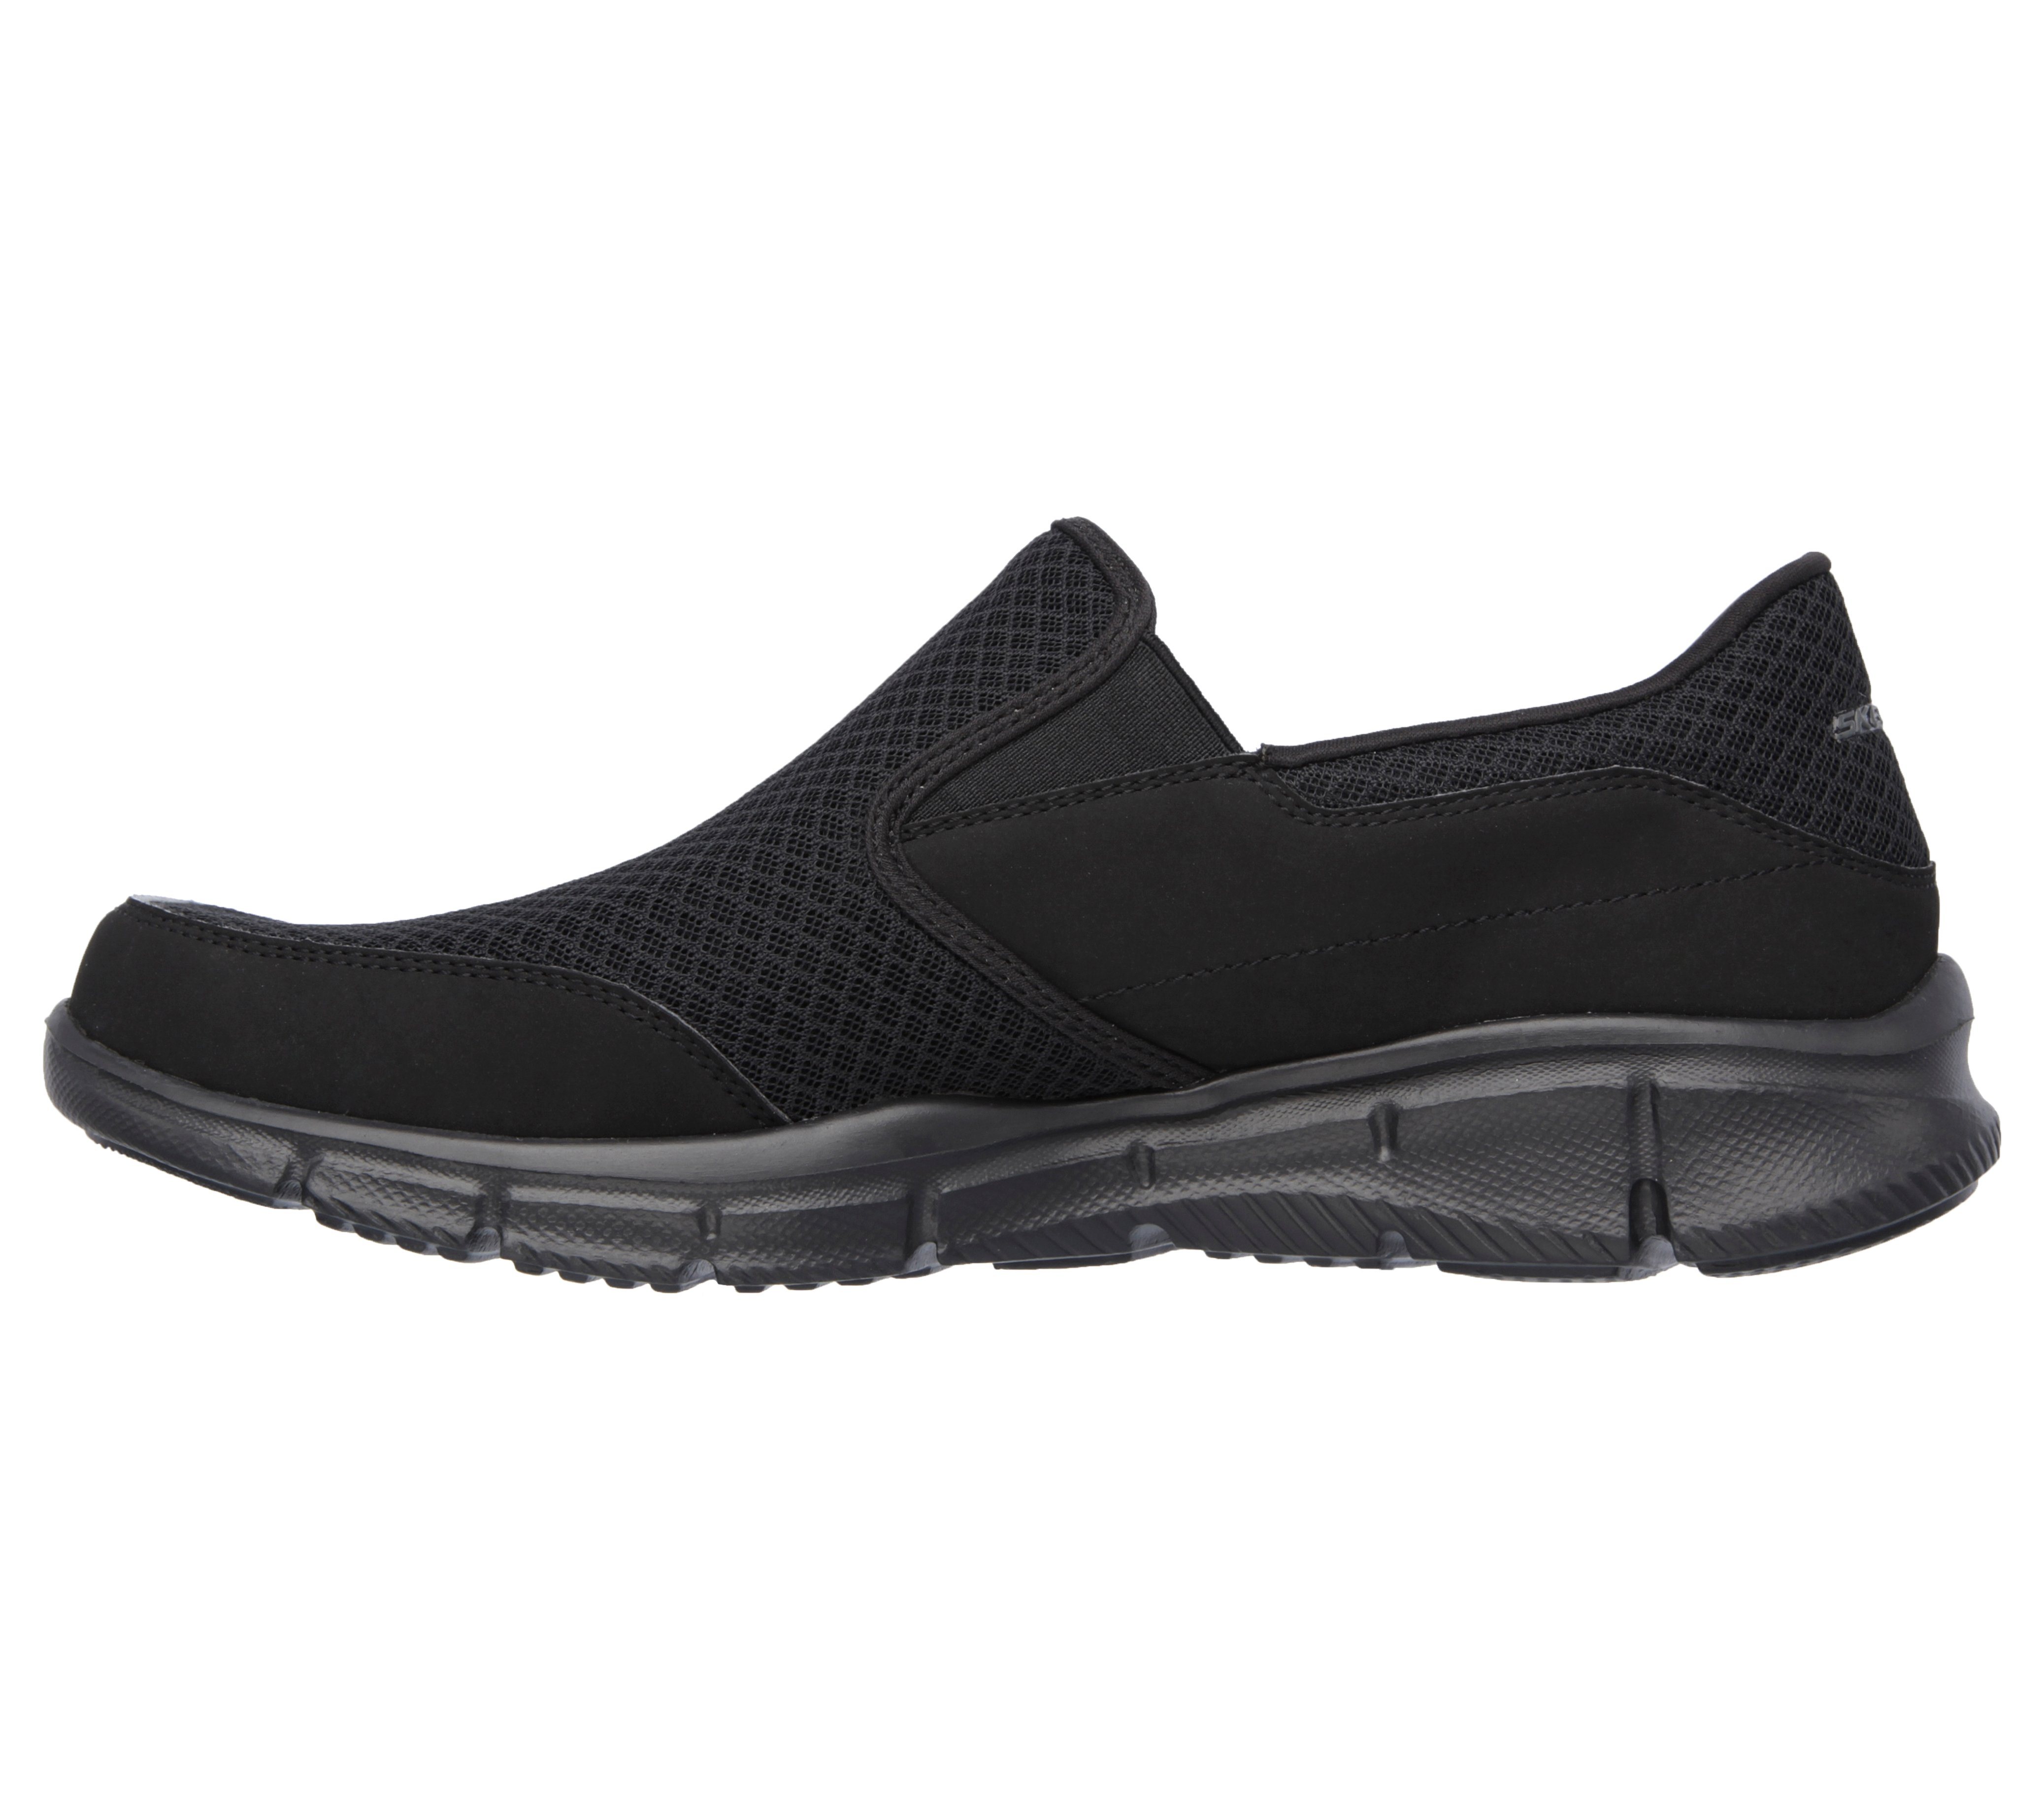 skechers women's equalizer first rate